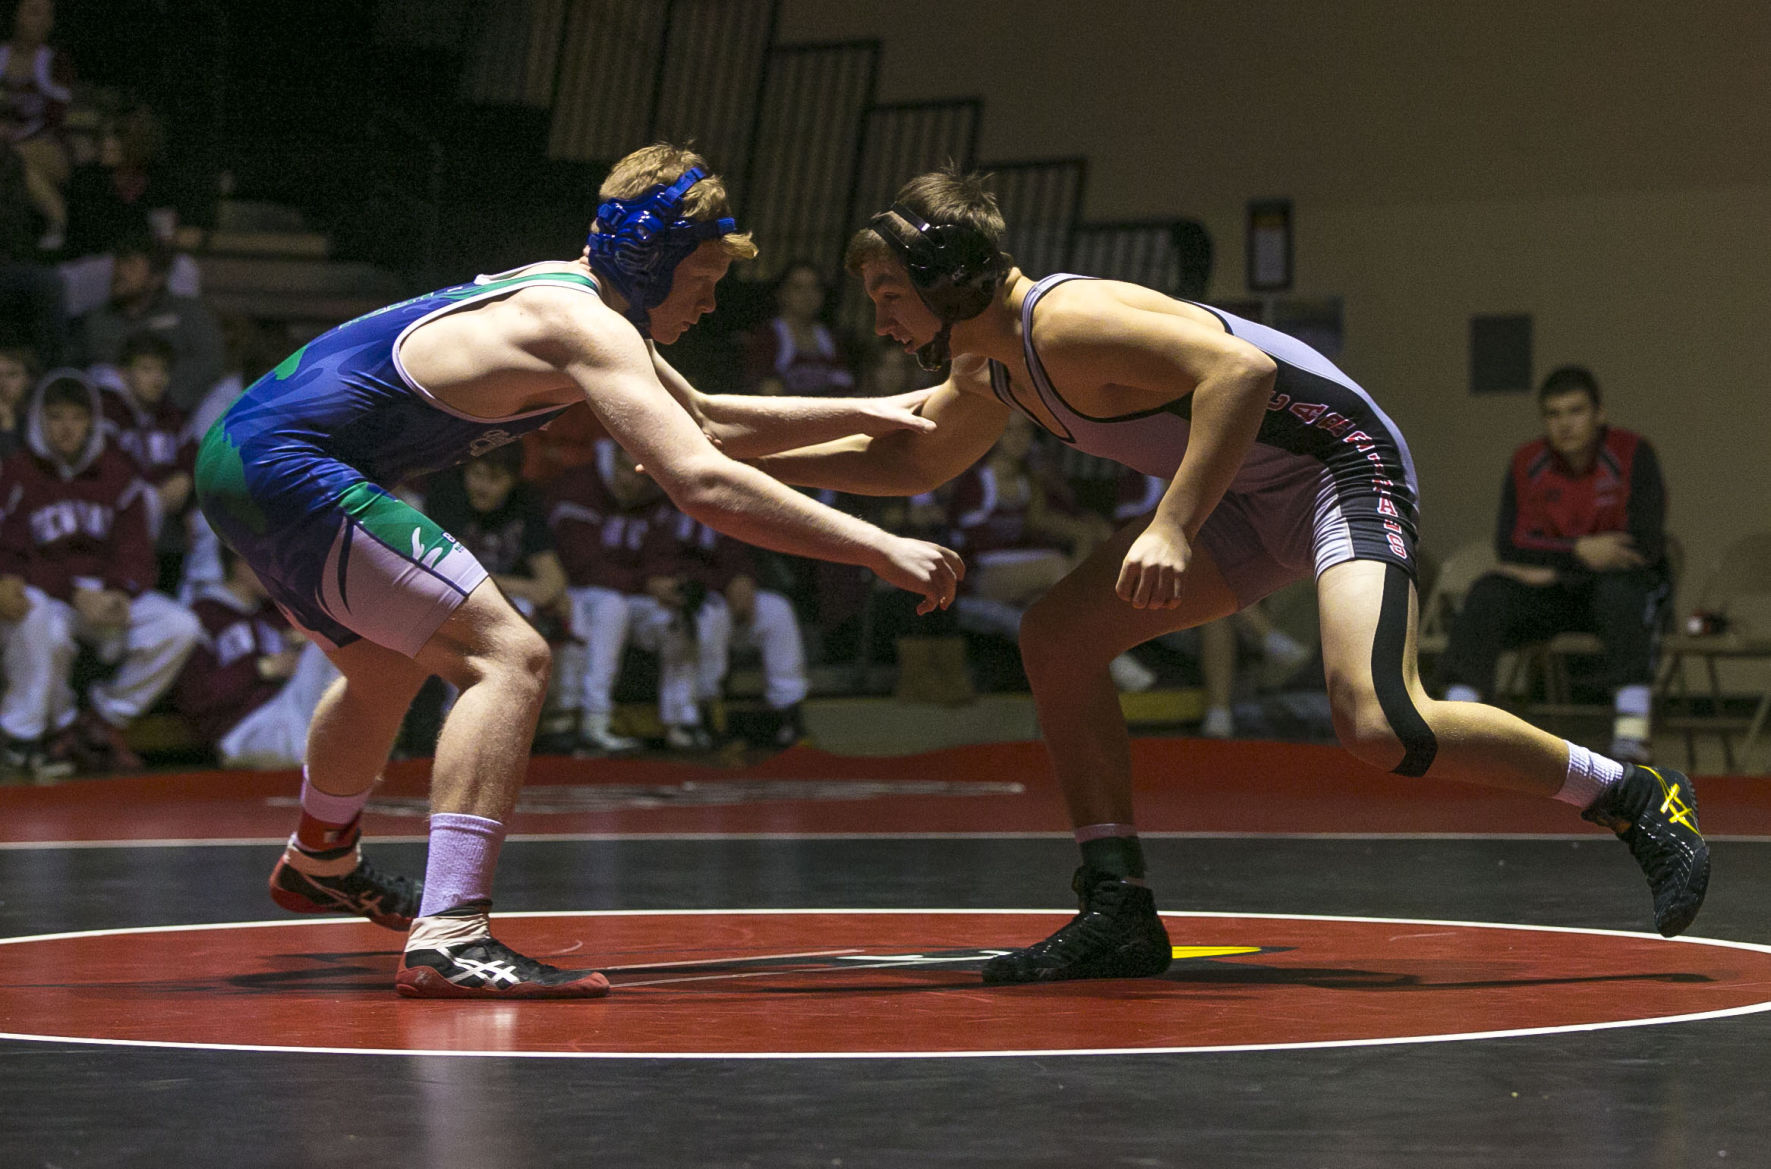 GHV sophomore Shaw makes jump from basketball player to sectional wrestling champ